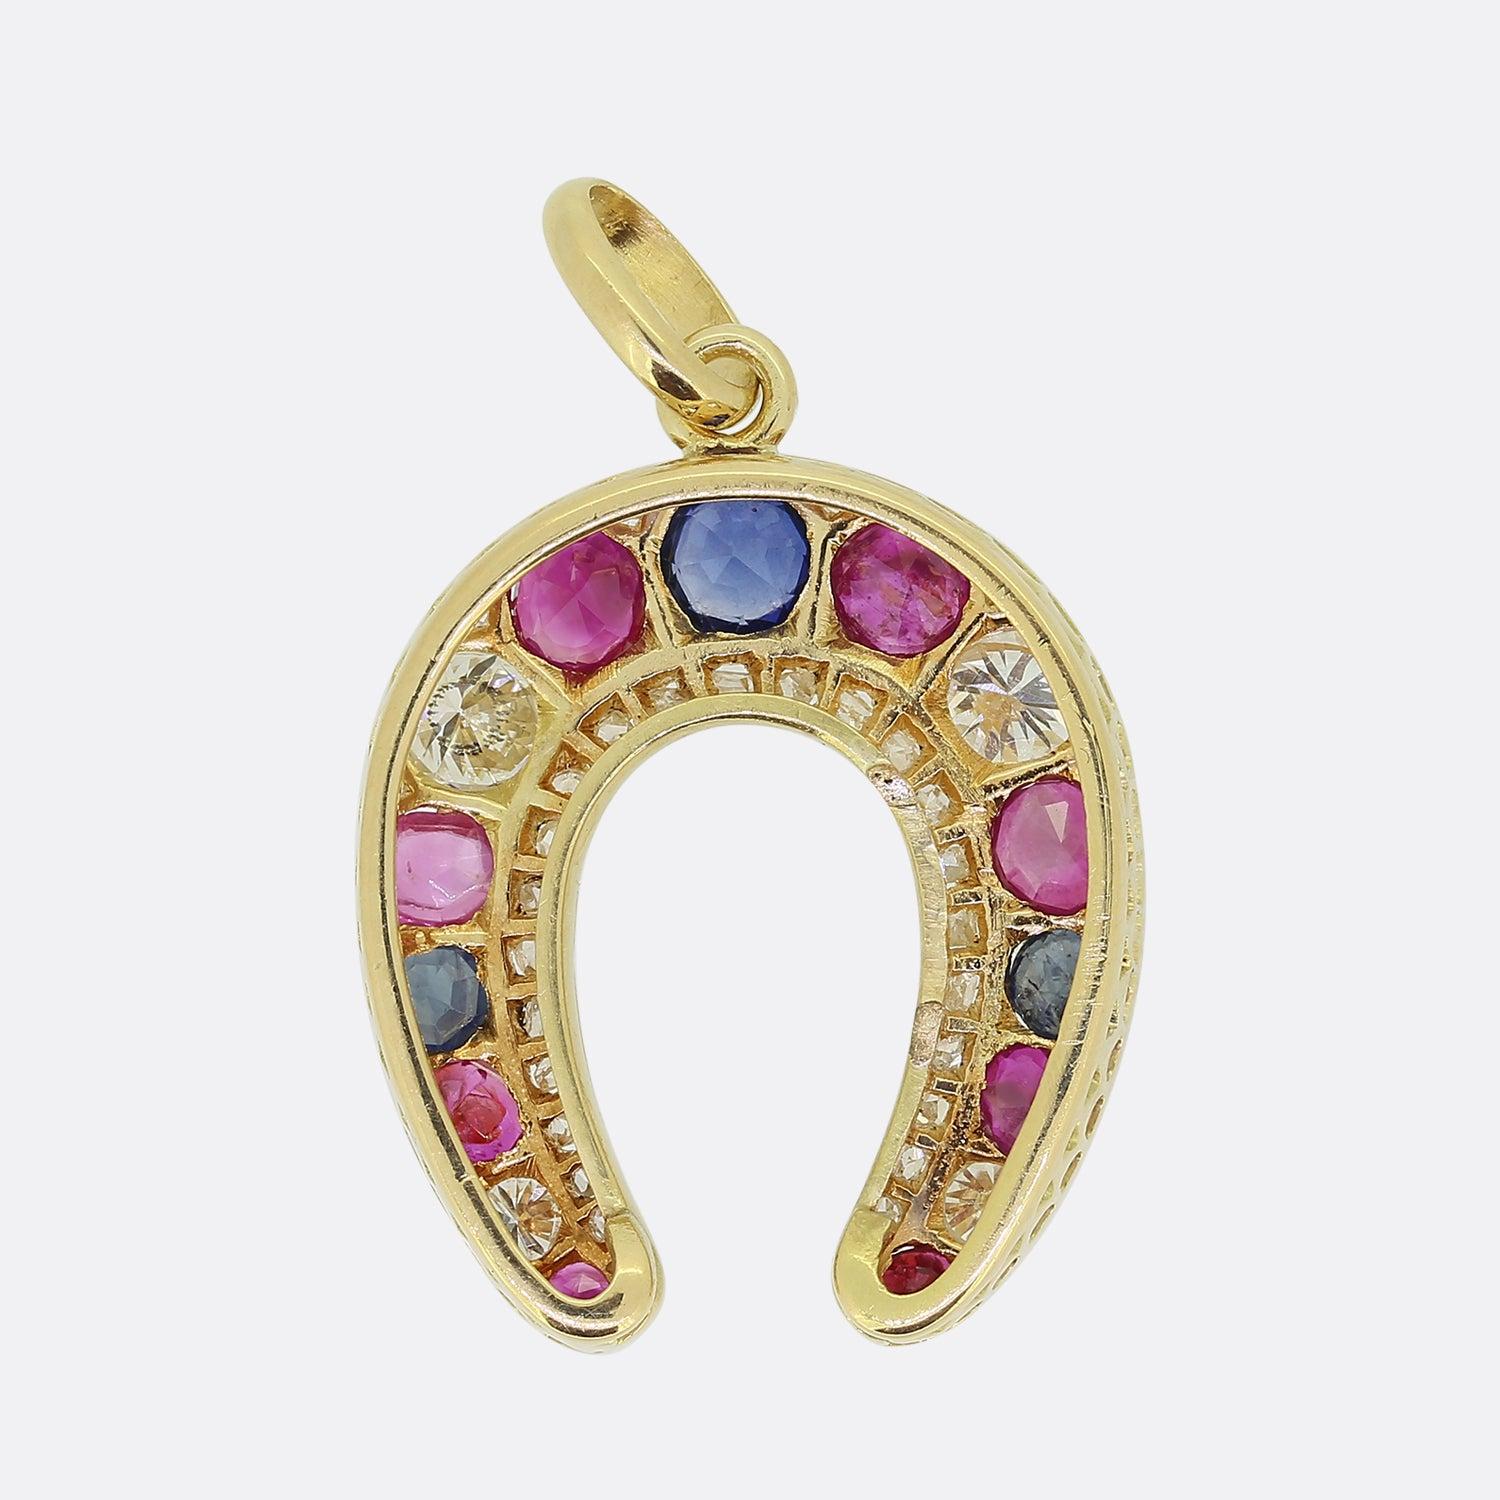 Here we have a wonderful multi gemstone pendant. This vintage piece has been crafted from 18ct yellow gold into the shape of a horseshoe - a principle symbol of good luck and protection. In this case, a trio of alternating precious gemstones have